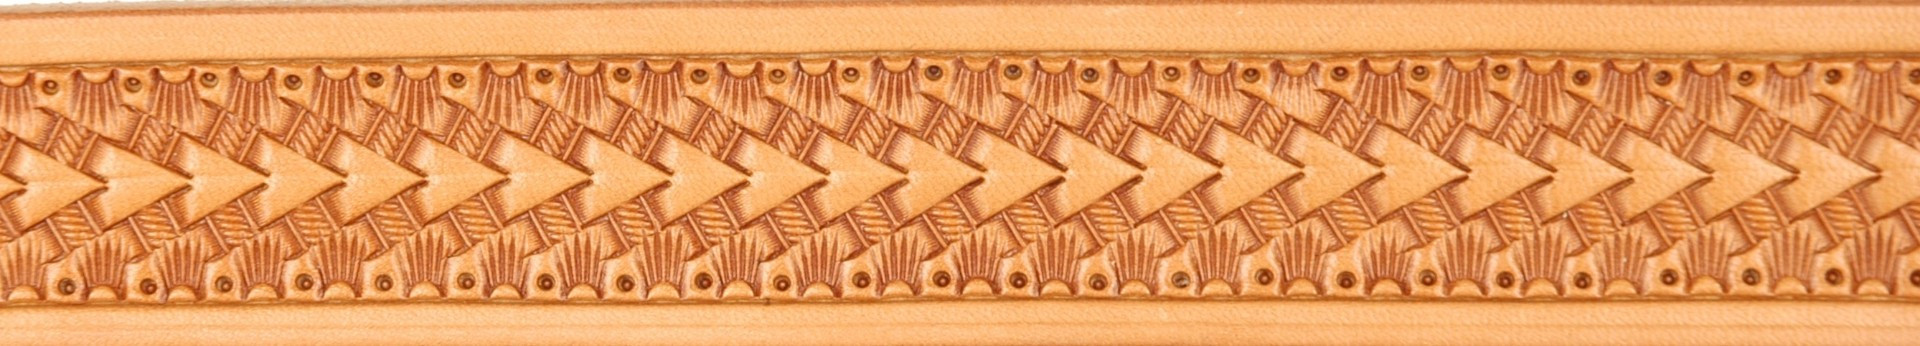 Lone Tree Leather Works  Tooling Patterns for Traditional Hand Carved  Leather Belts